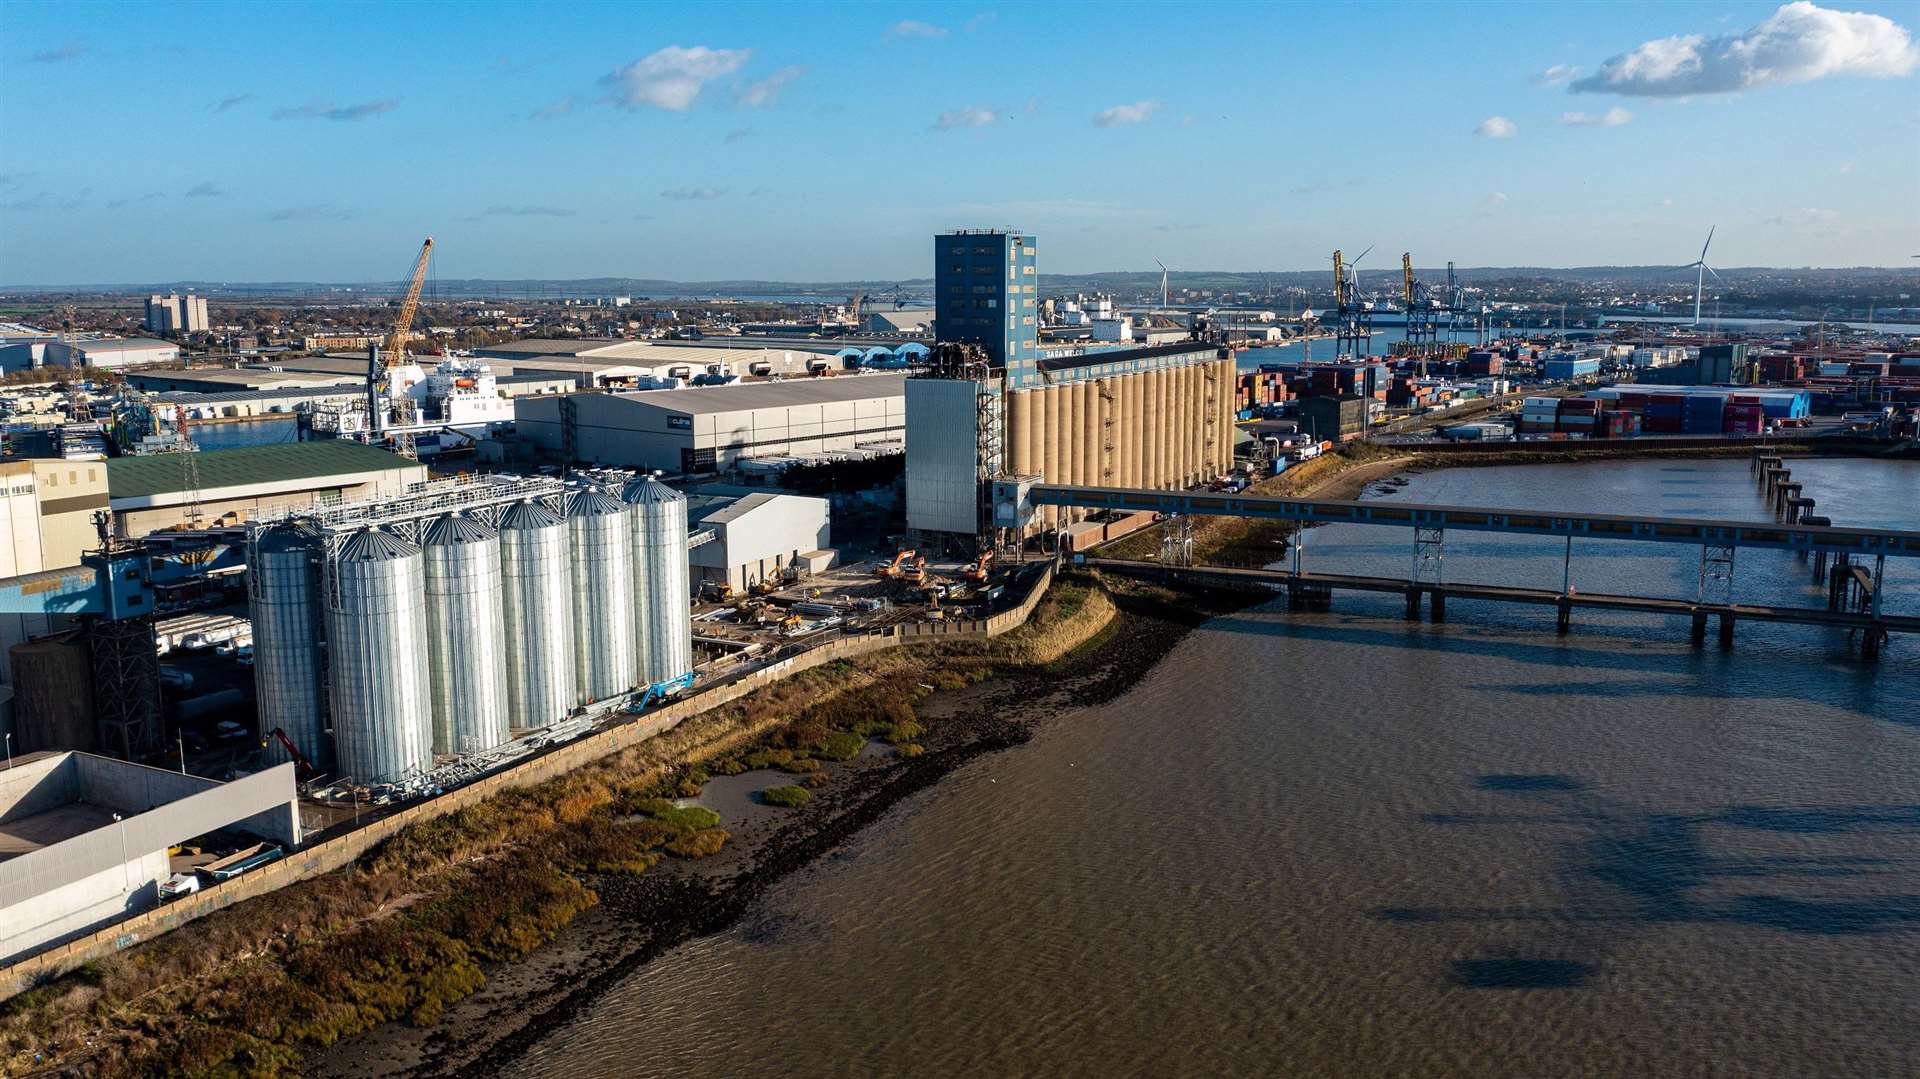 Aerial images of the grain terminal at the Port of Tilbury